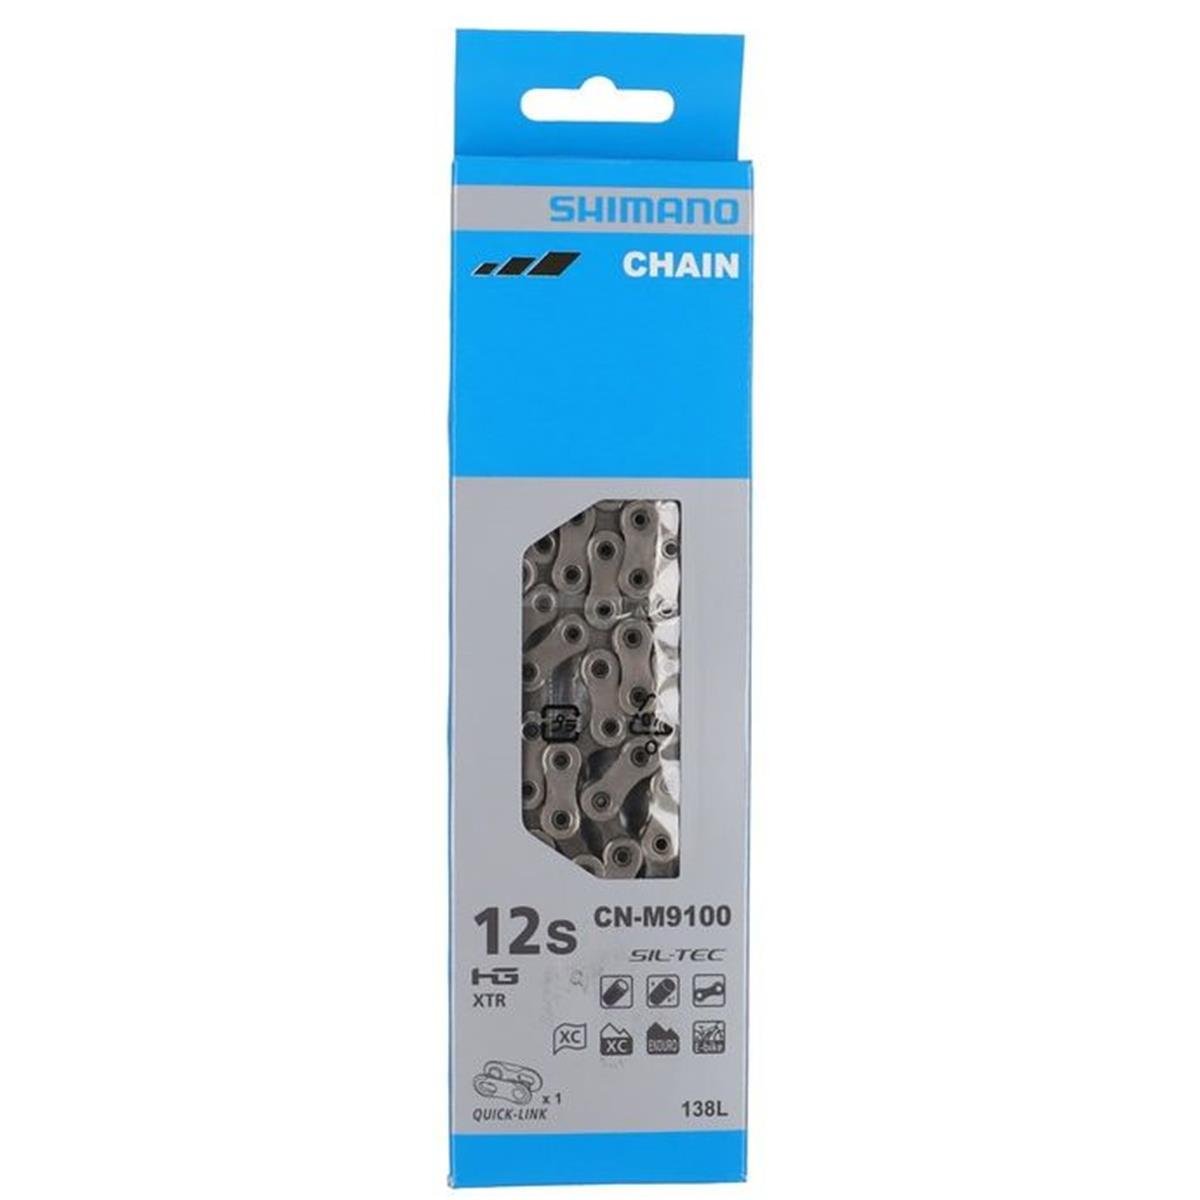 Shimano MTB Chain CN-M9100 138 Links, 12-Speed, with Master Link